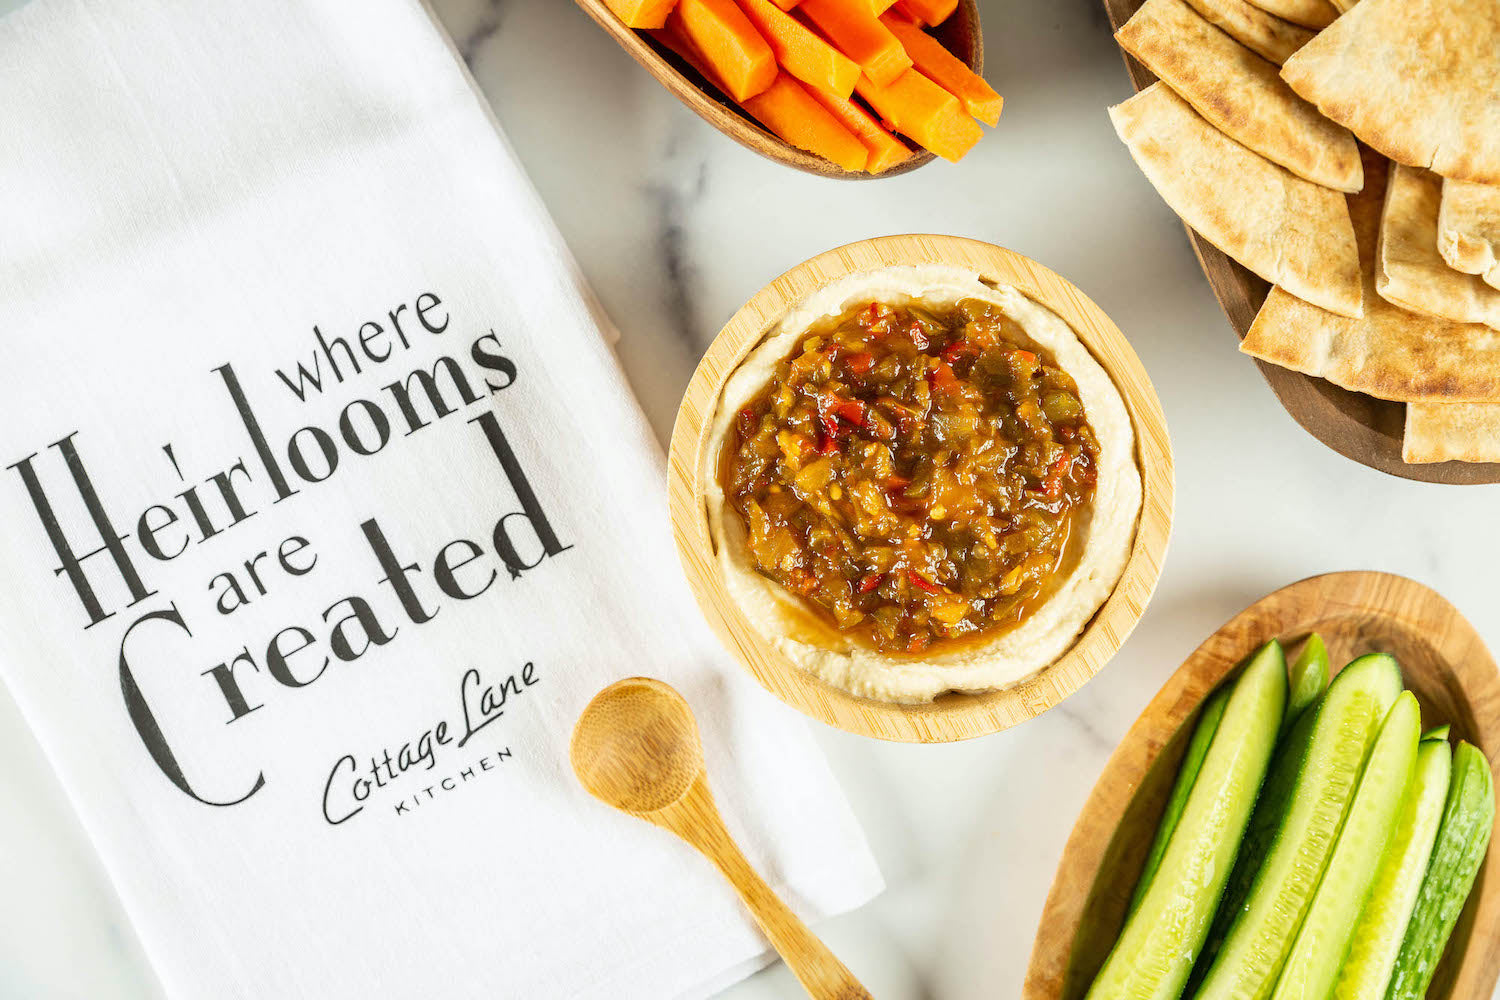 Spicy Pepper Relish on Hummus with carrots cuccumbers and pita bread and a dish towel that says where heirlooms are created Cottage Lane Kitchen